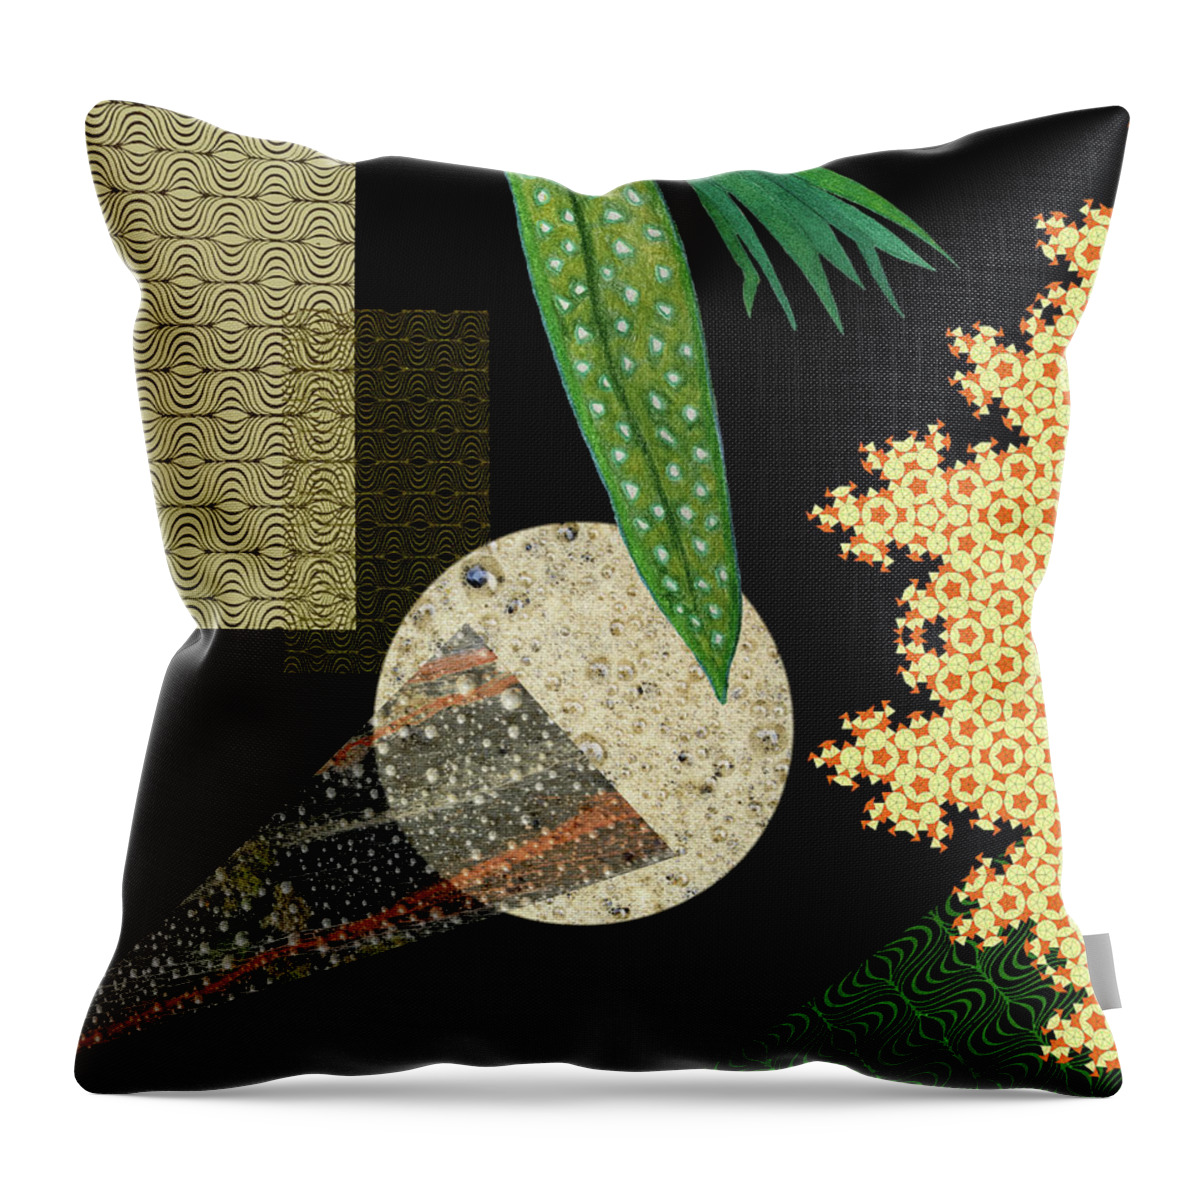 Abstract With Leaves Throw Pillow featuring the digital art Abstract with Leaves by Lorena Cassady